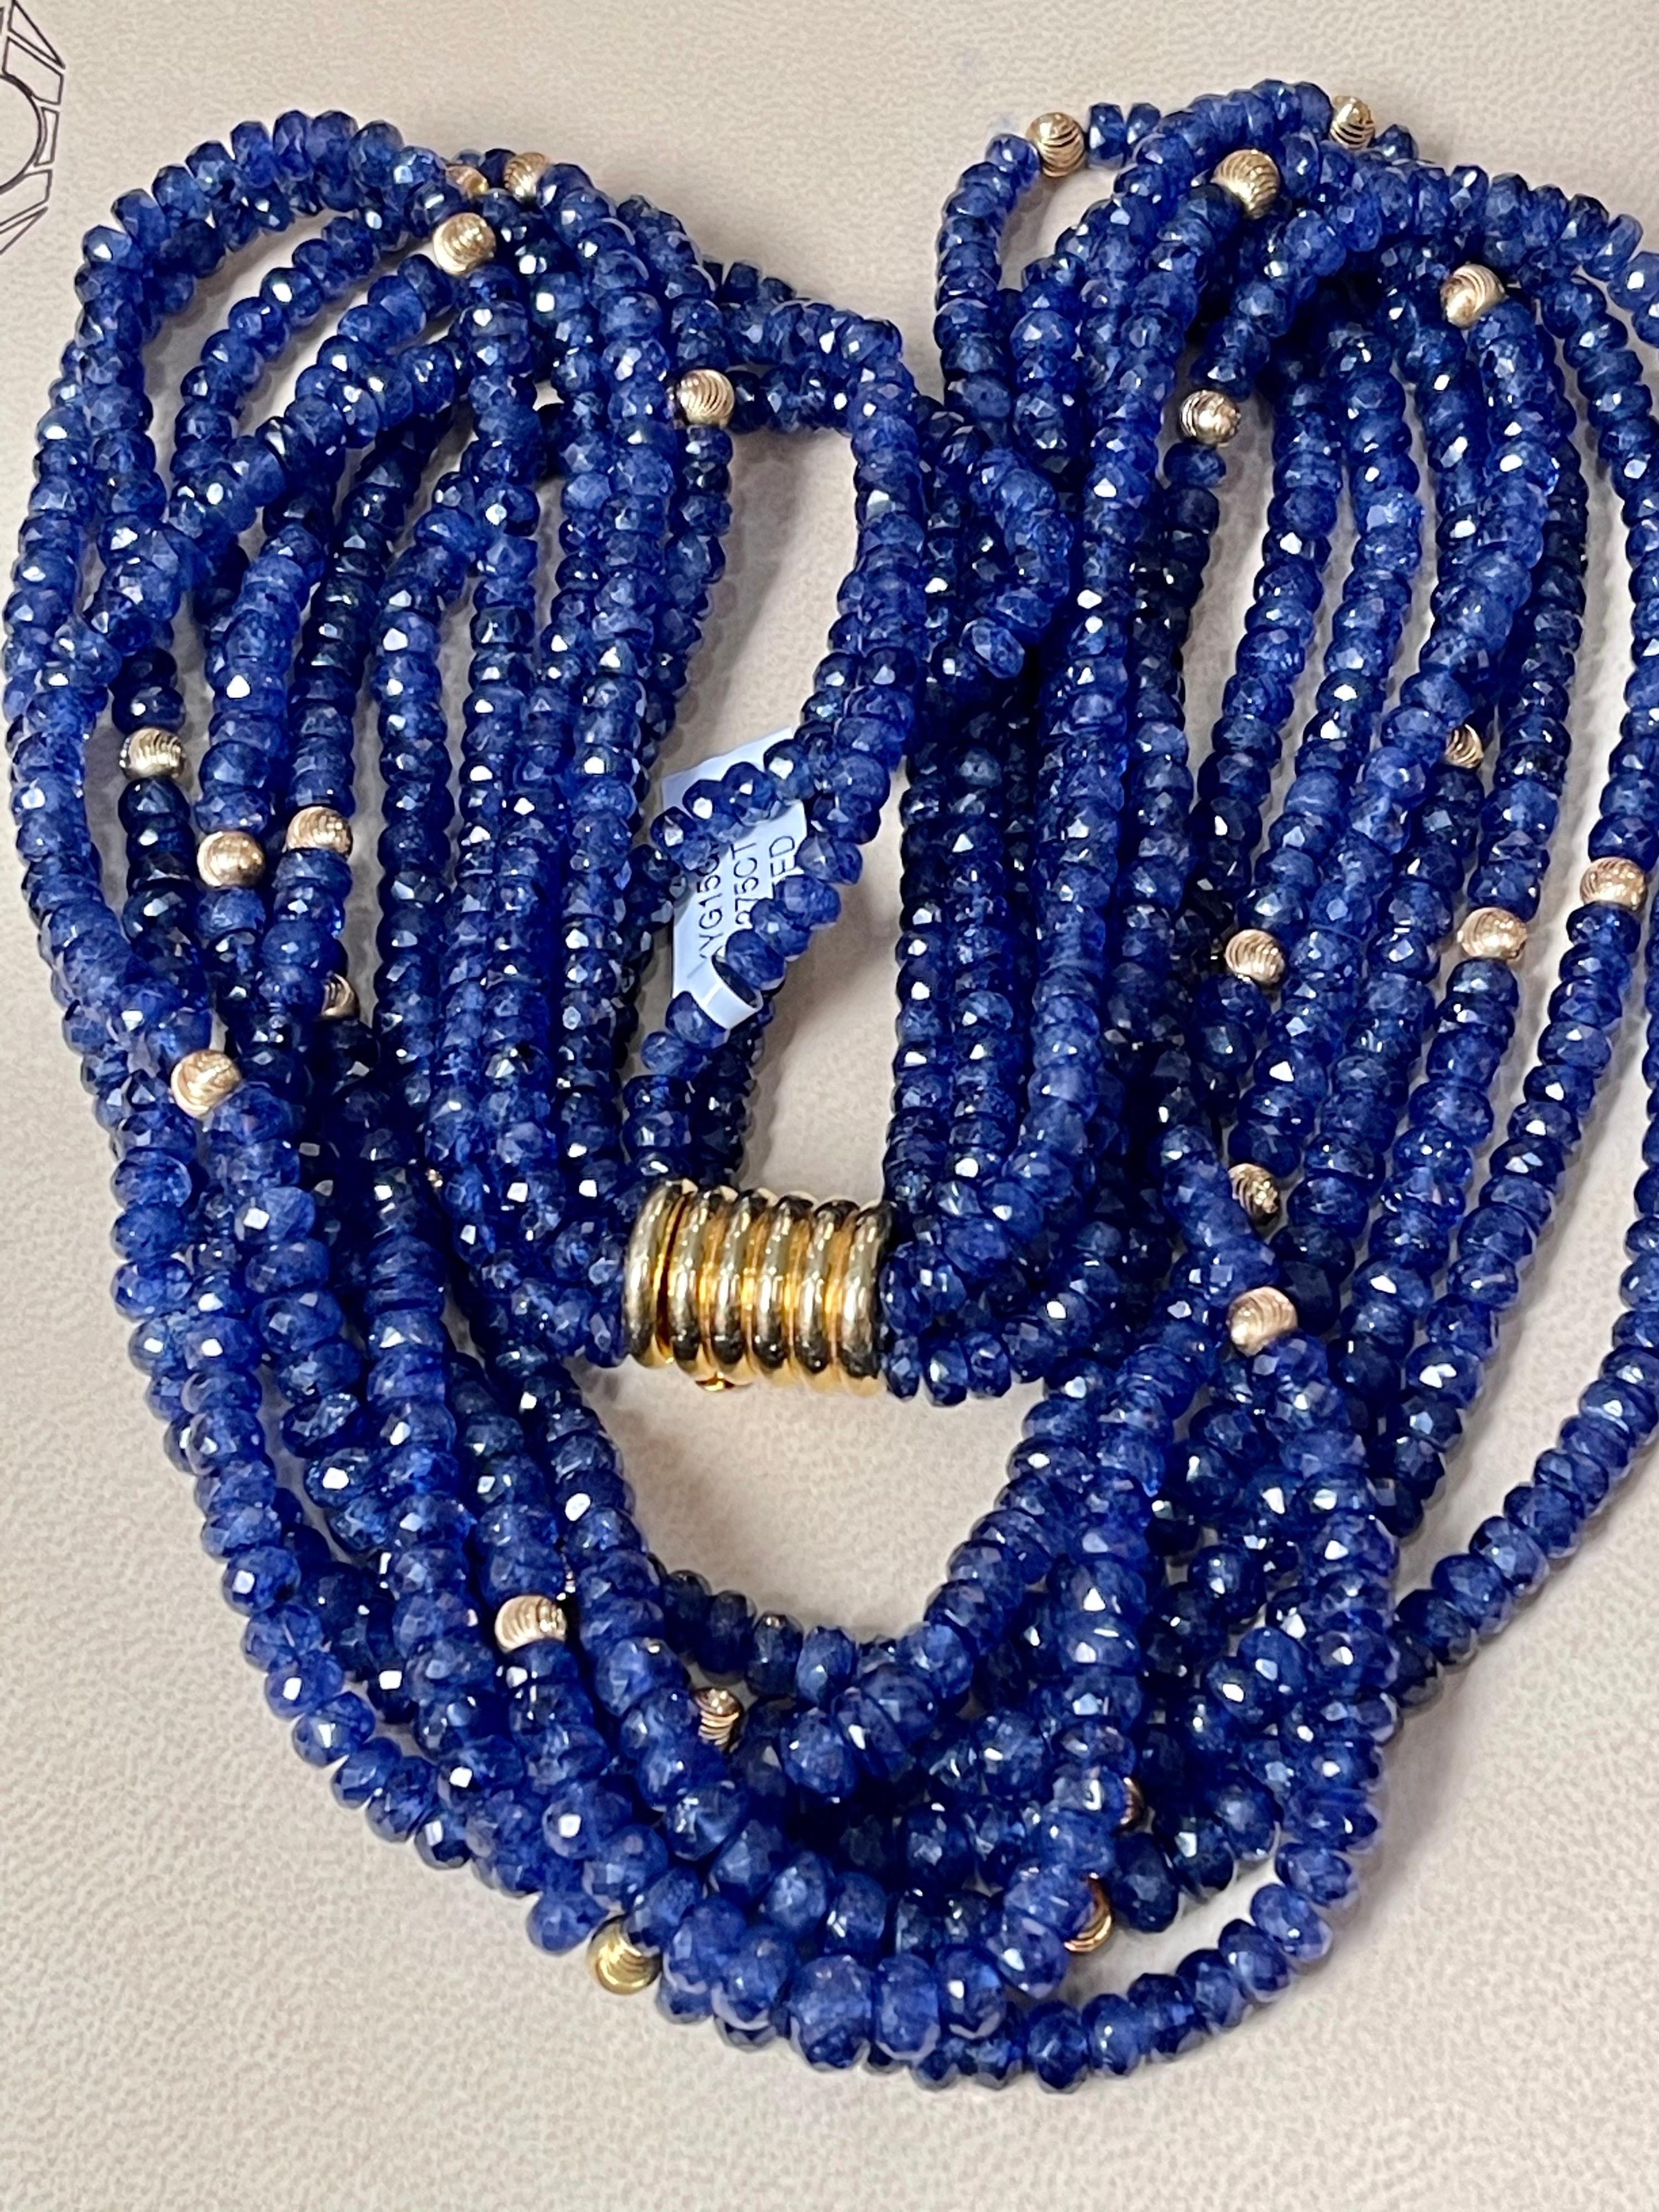 Twisted 1275 Ct Natural Tanzanite Bead Seven Strand Necklace + 15 Gm 14 K Y Gold For Sale 2